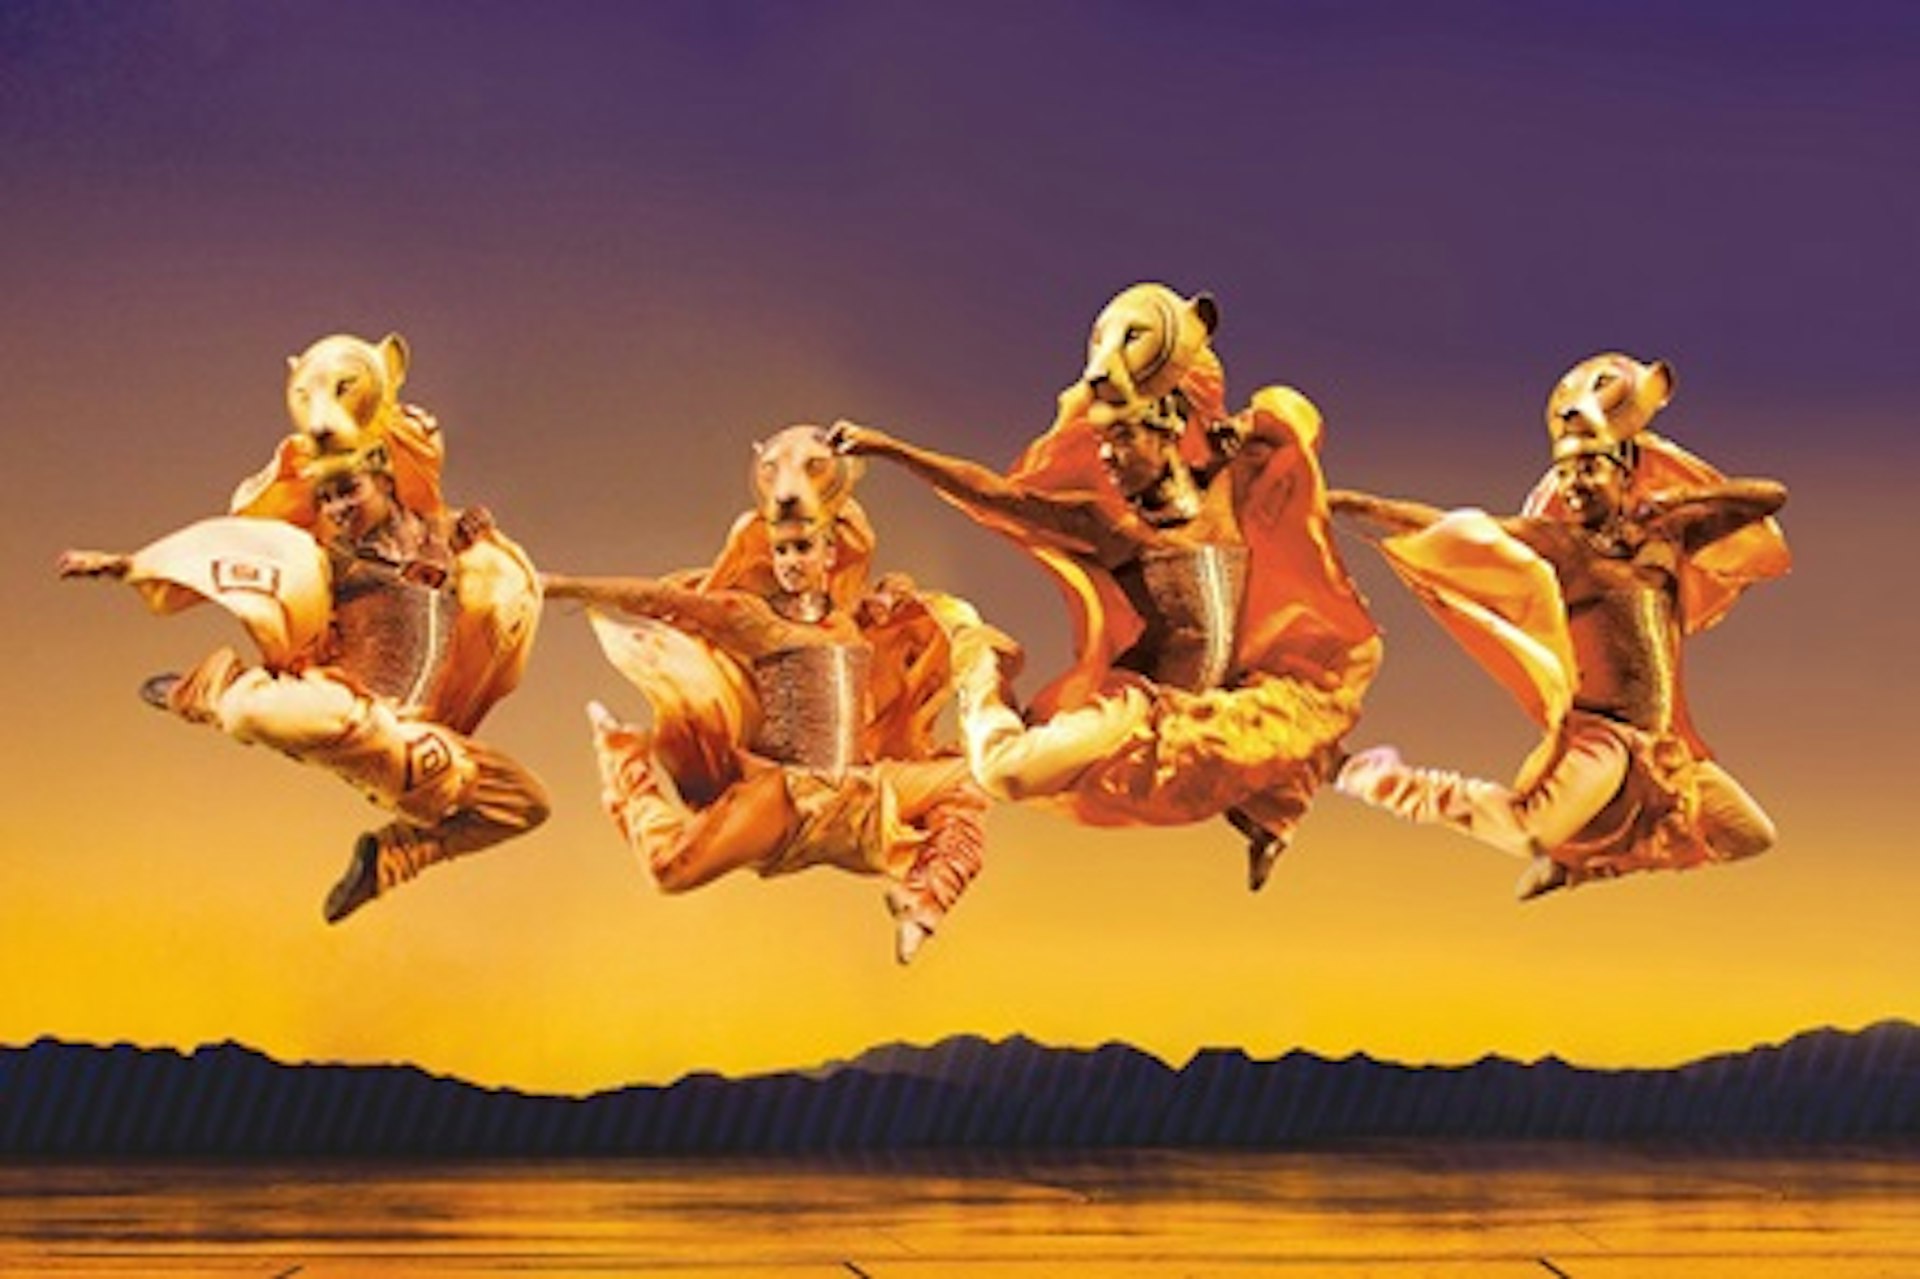 Disney's The Lion King Theatre Tickets with Meal and Prosecco for Two